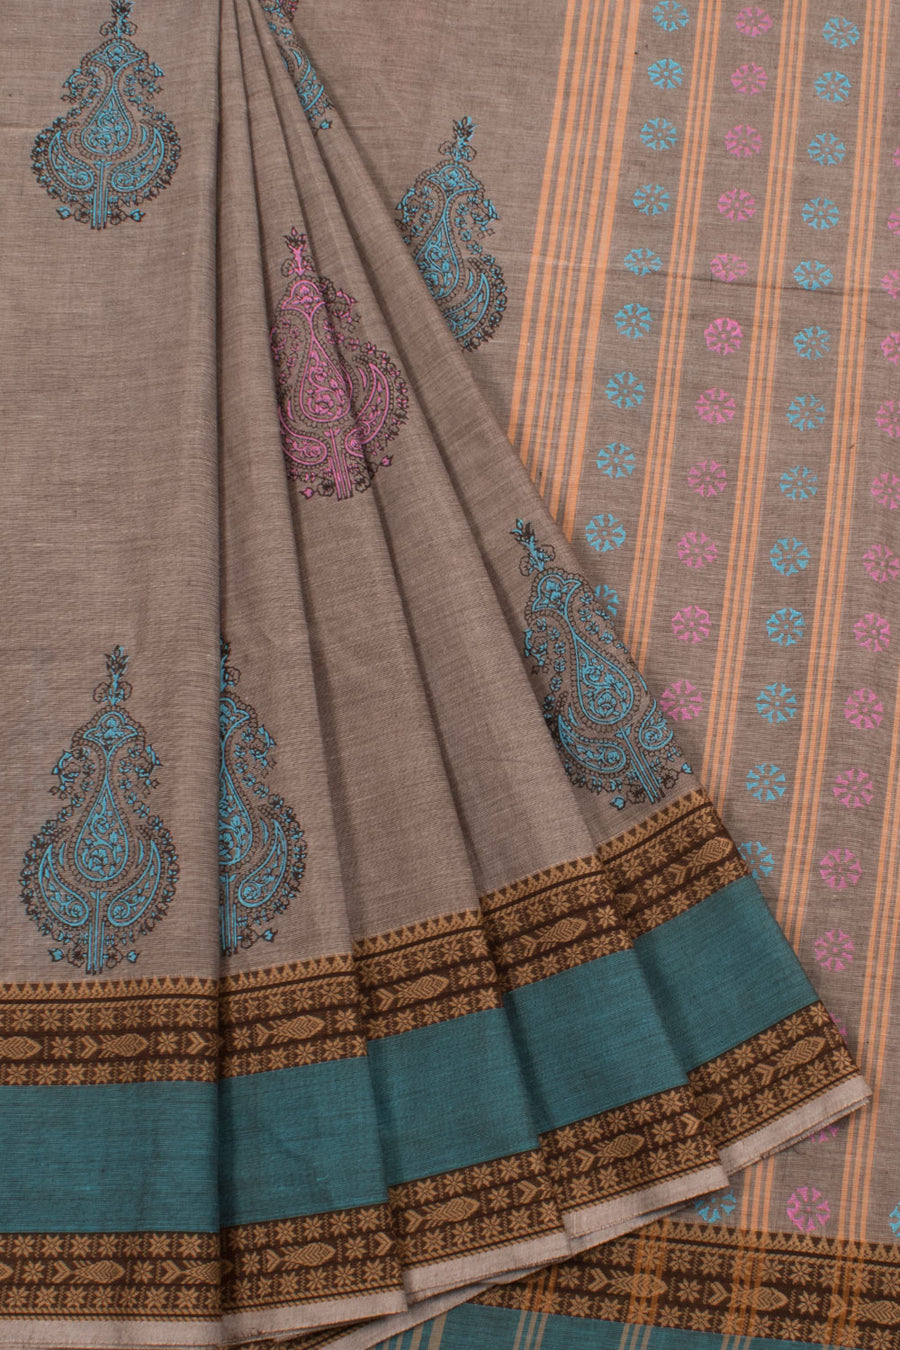 Hand Block Printed Cotton Saree with Floral Motifs and Fish Border